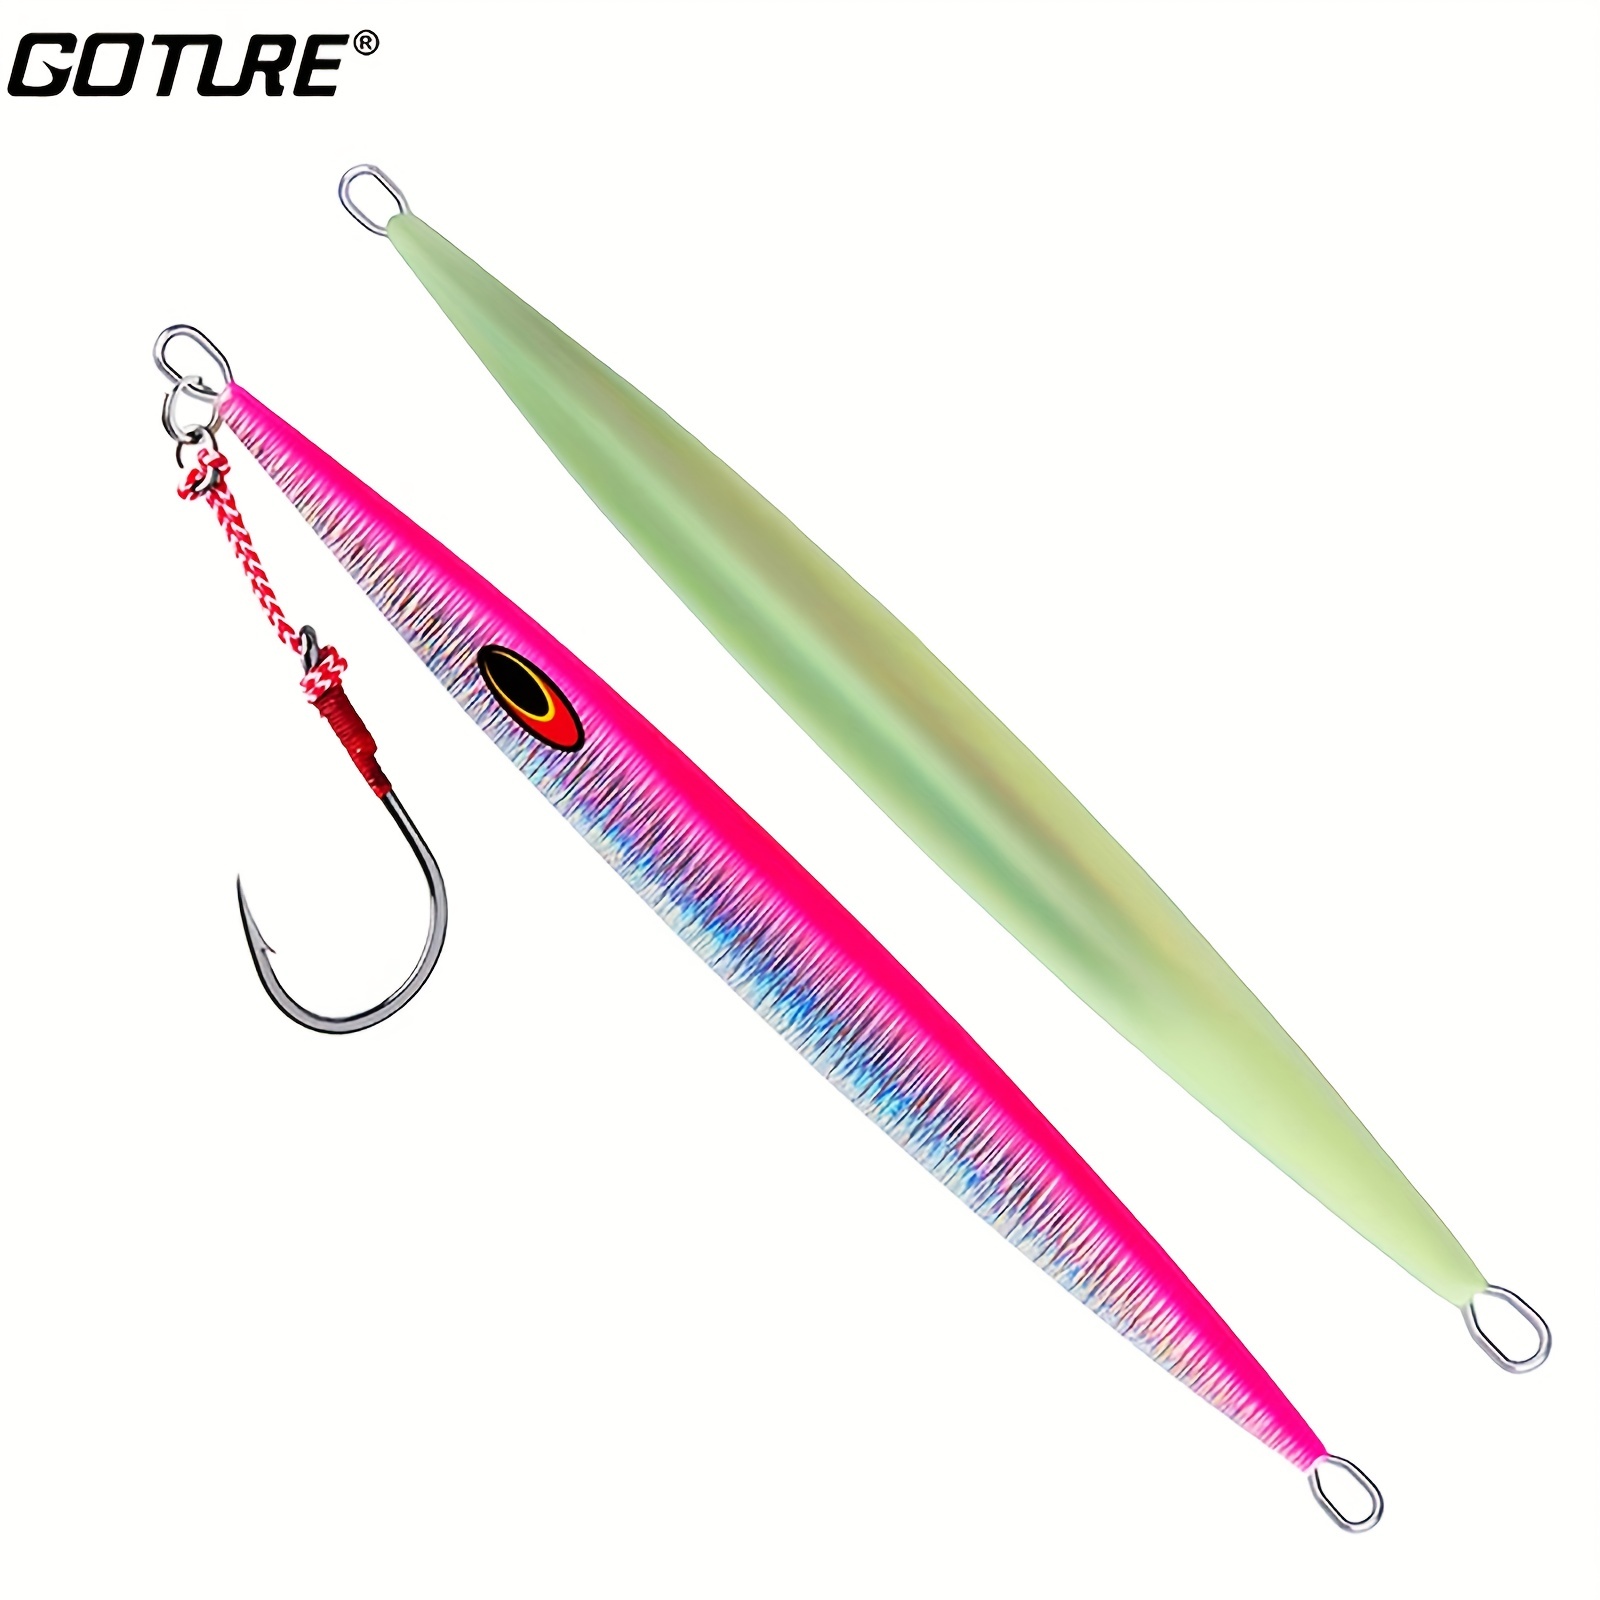 Goture Jigging Lures,Pitch Jigs,Metal Jigs,Vertical Jigs,Jigs Spoon,Jig  Lures,Fishing Spinners,Saltwater Artificial Bait Boat Fishing Lures, Salmon